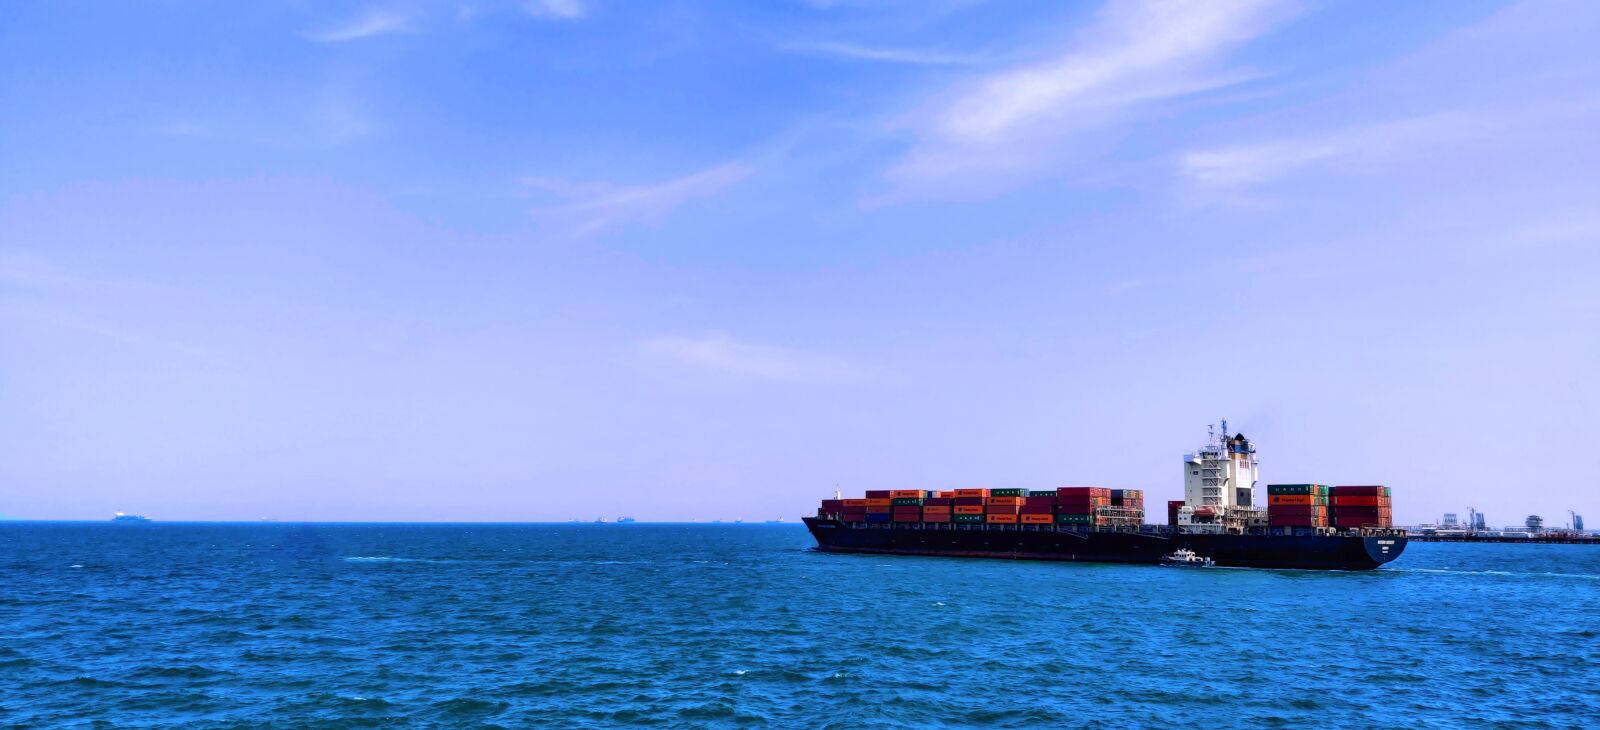 OnePlus GM1901 sample photo. Container vessel, ship, export photography